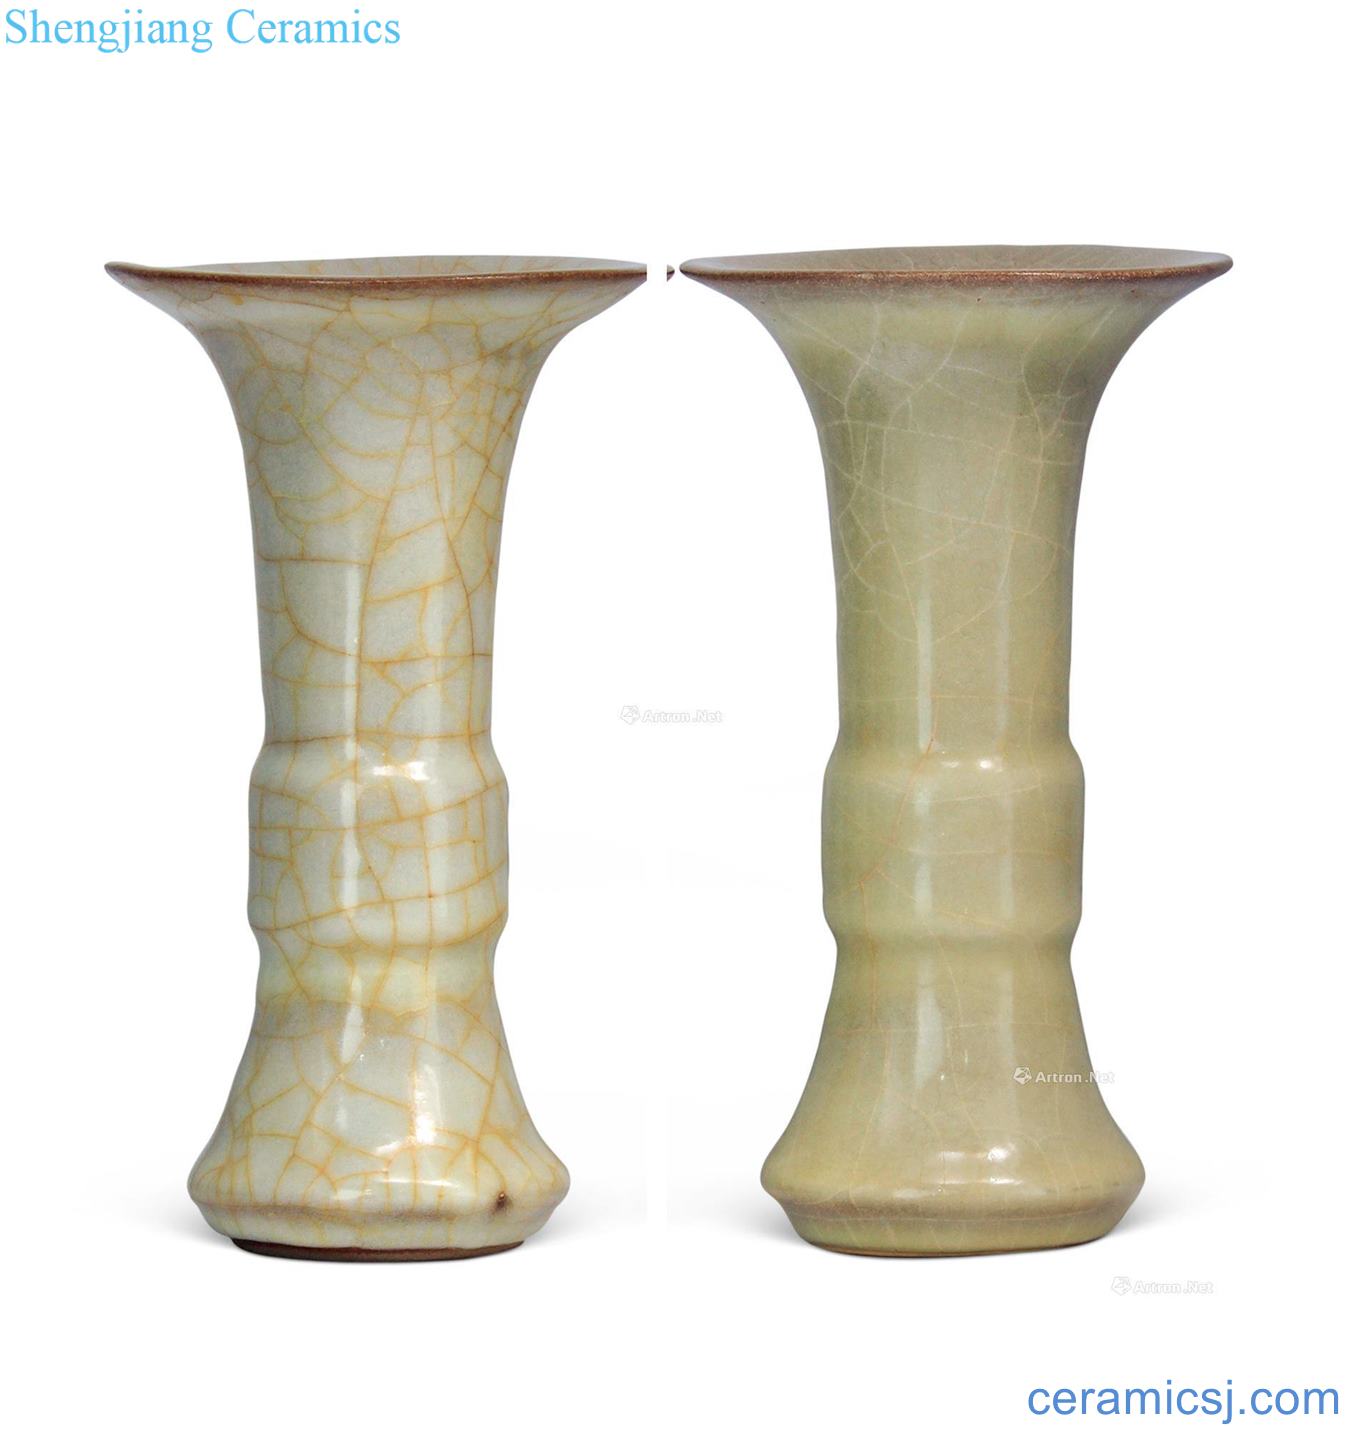 The song kiln flower vase with (a)